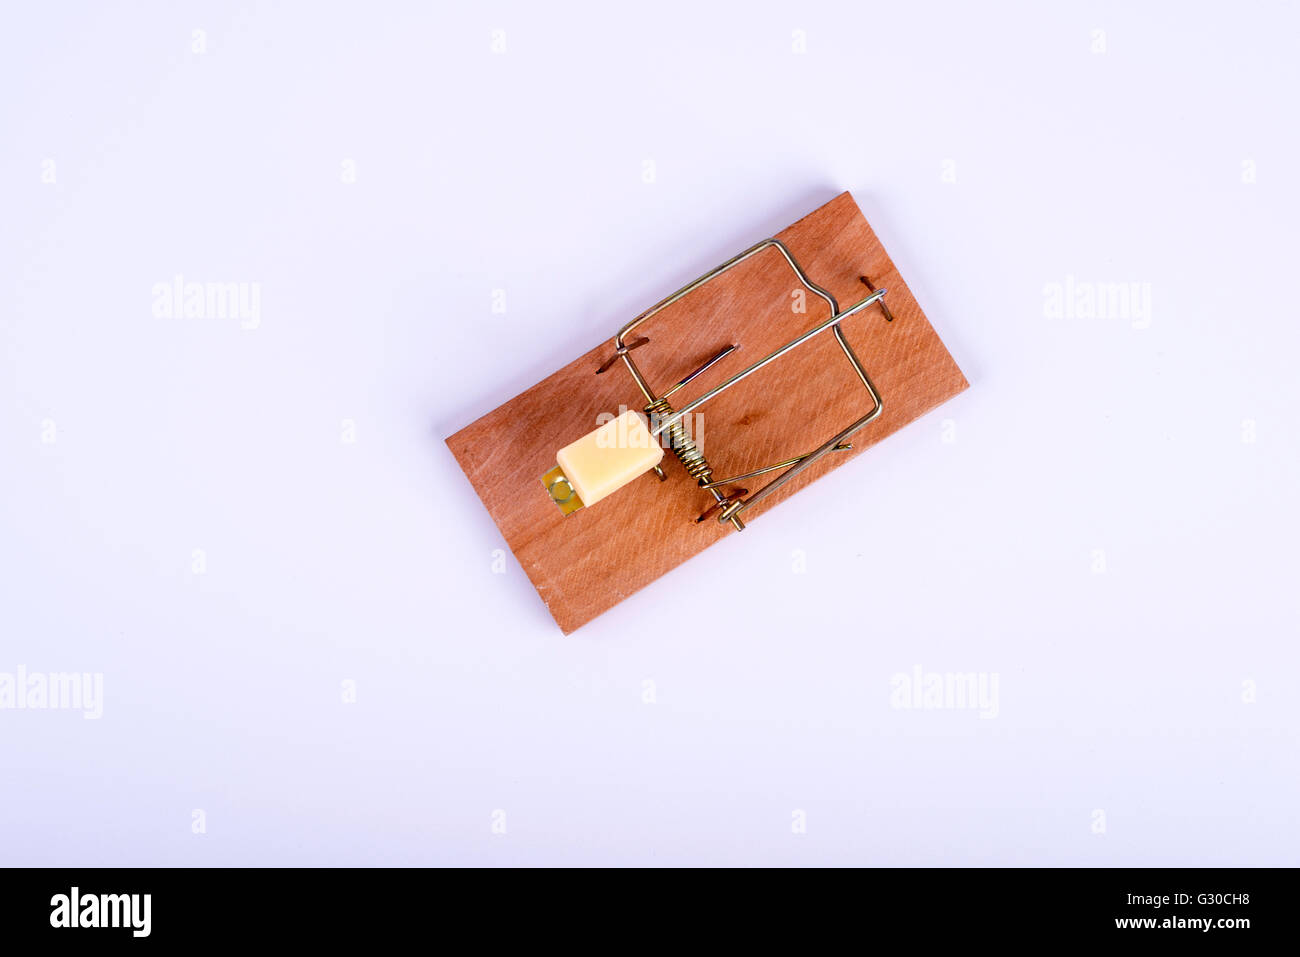 Photo of mouse trap on white background Stock Photo